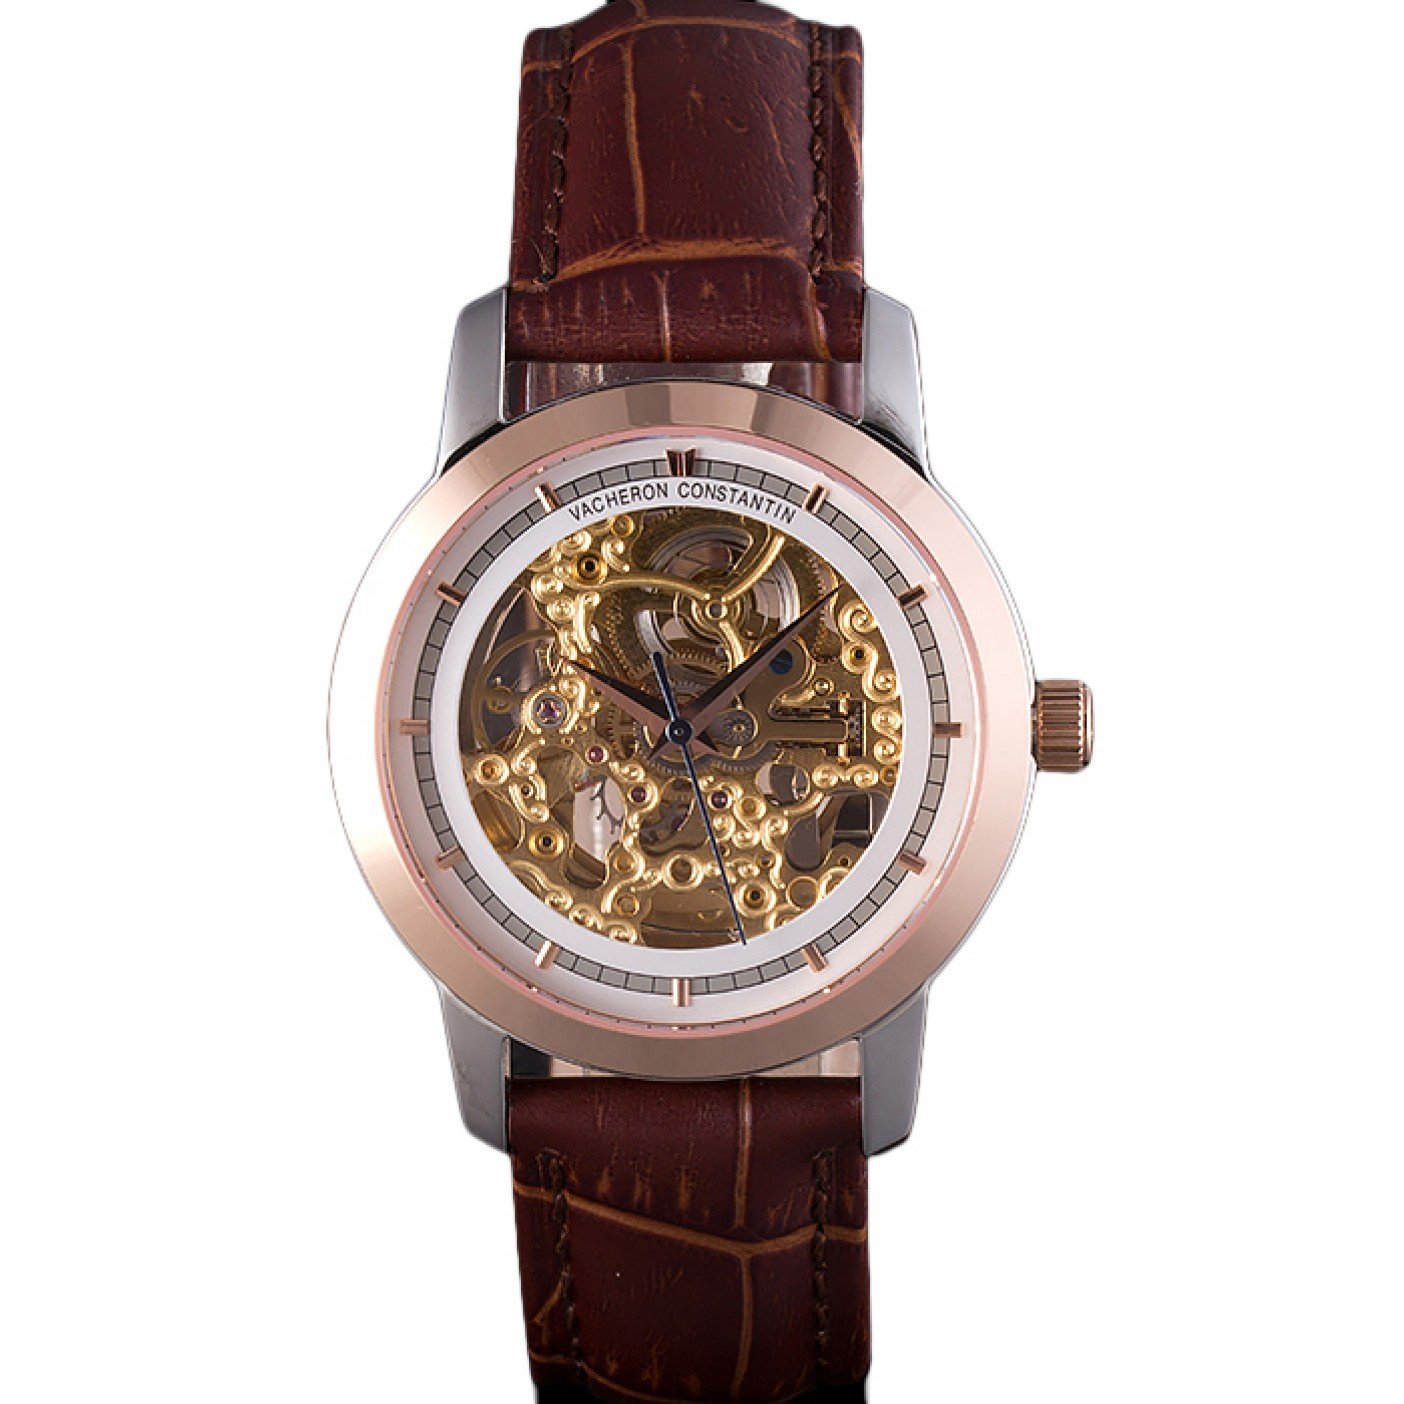 Vacheron Constantin White Skeleton Watch with Rose Gold Bezel and Brown Leather Strap 621539